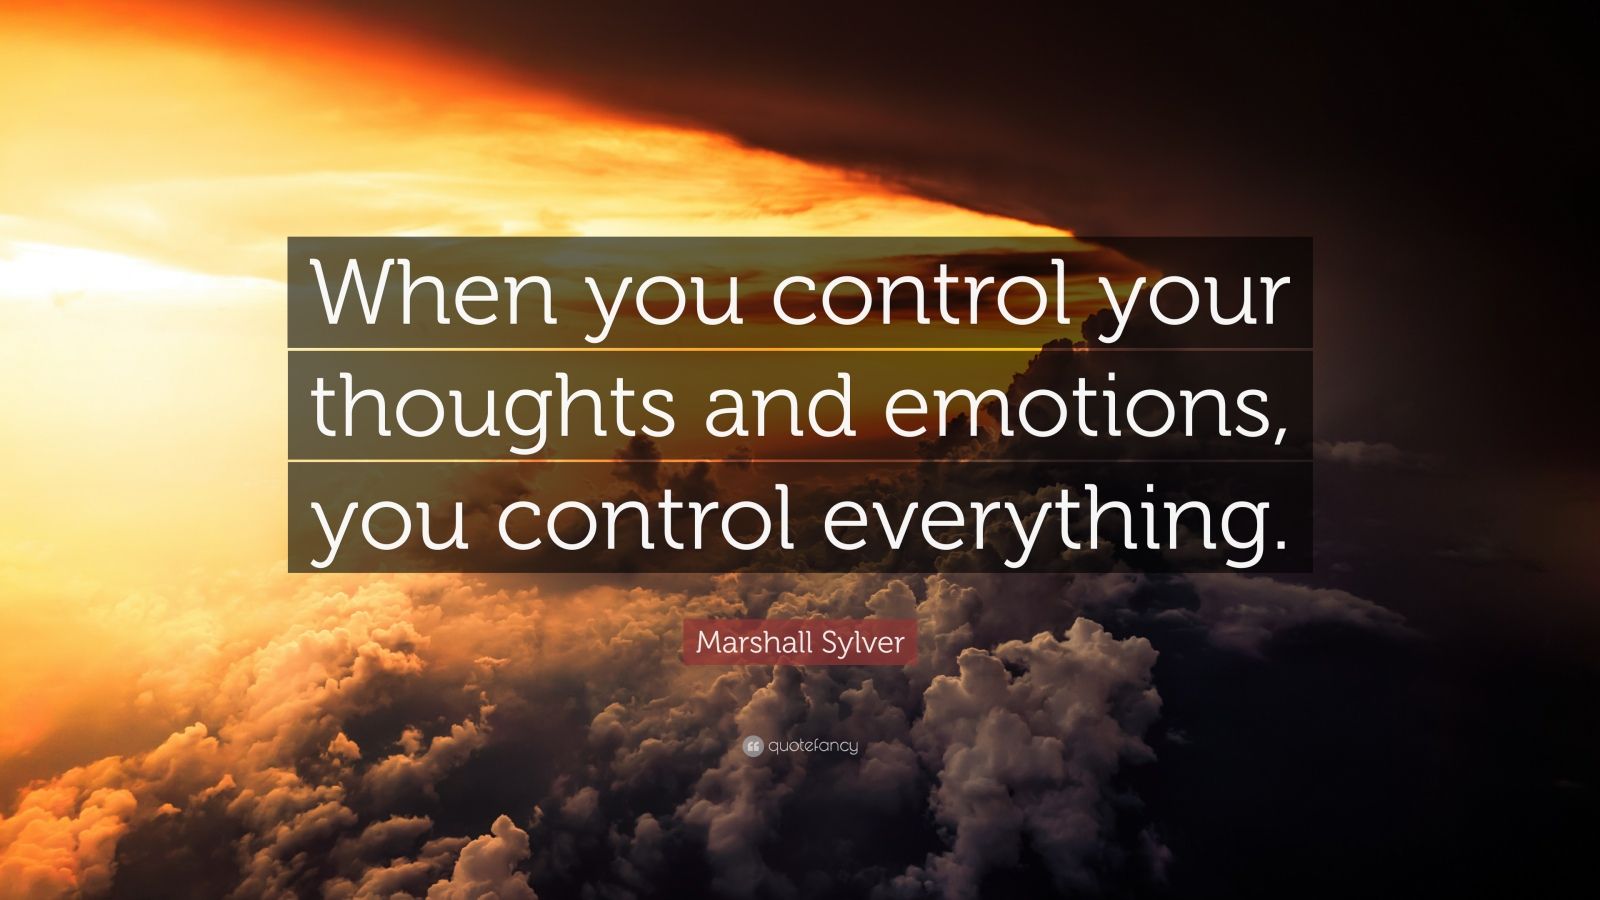 Marshall Sylver Quote: “When you control your thoughts and emotions